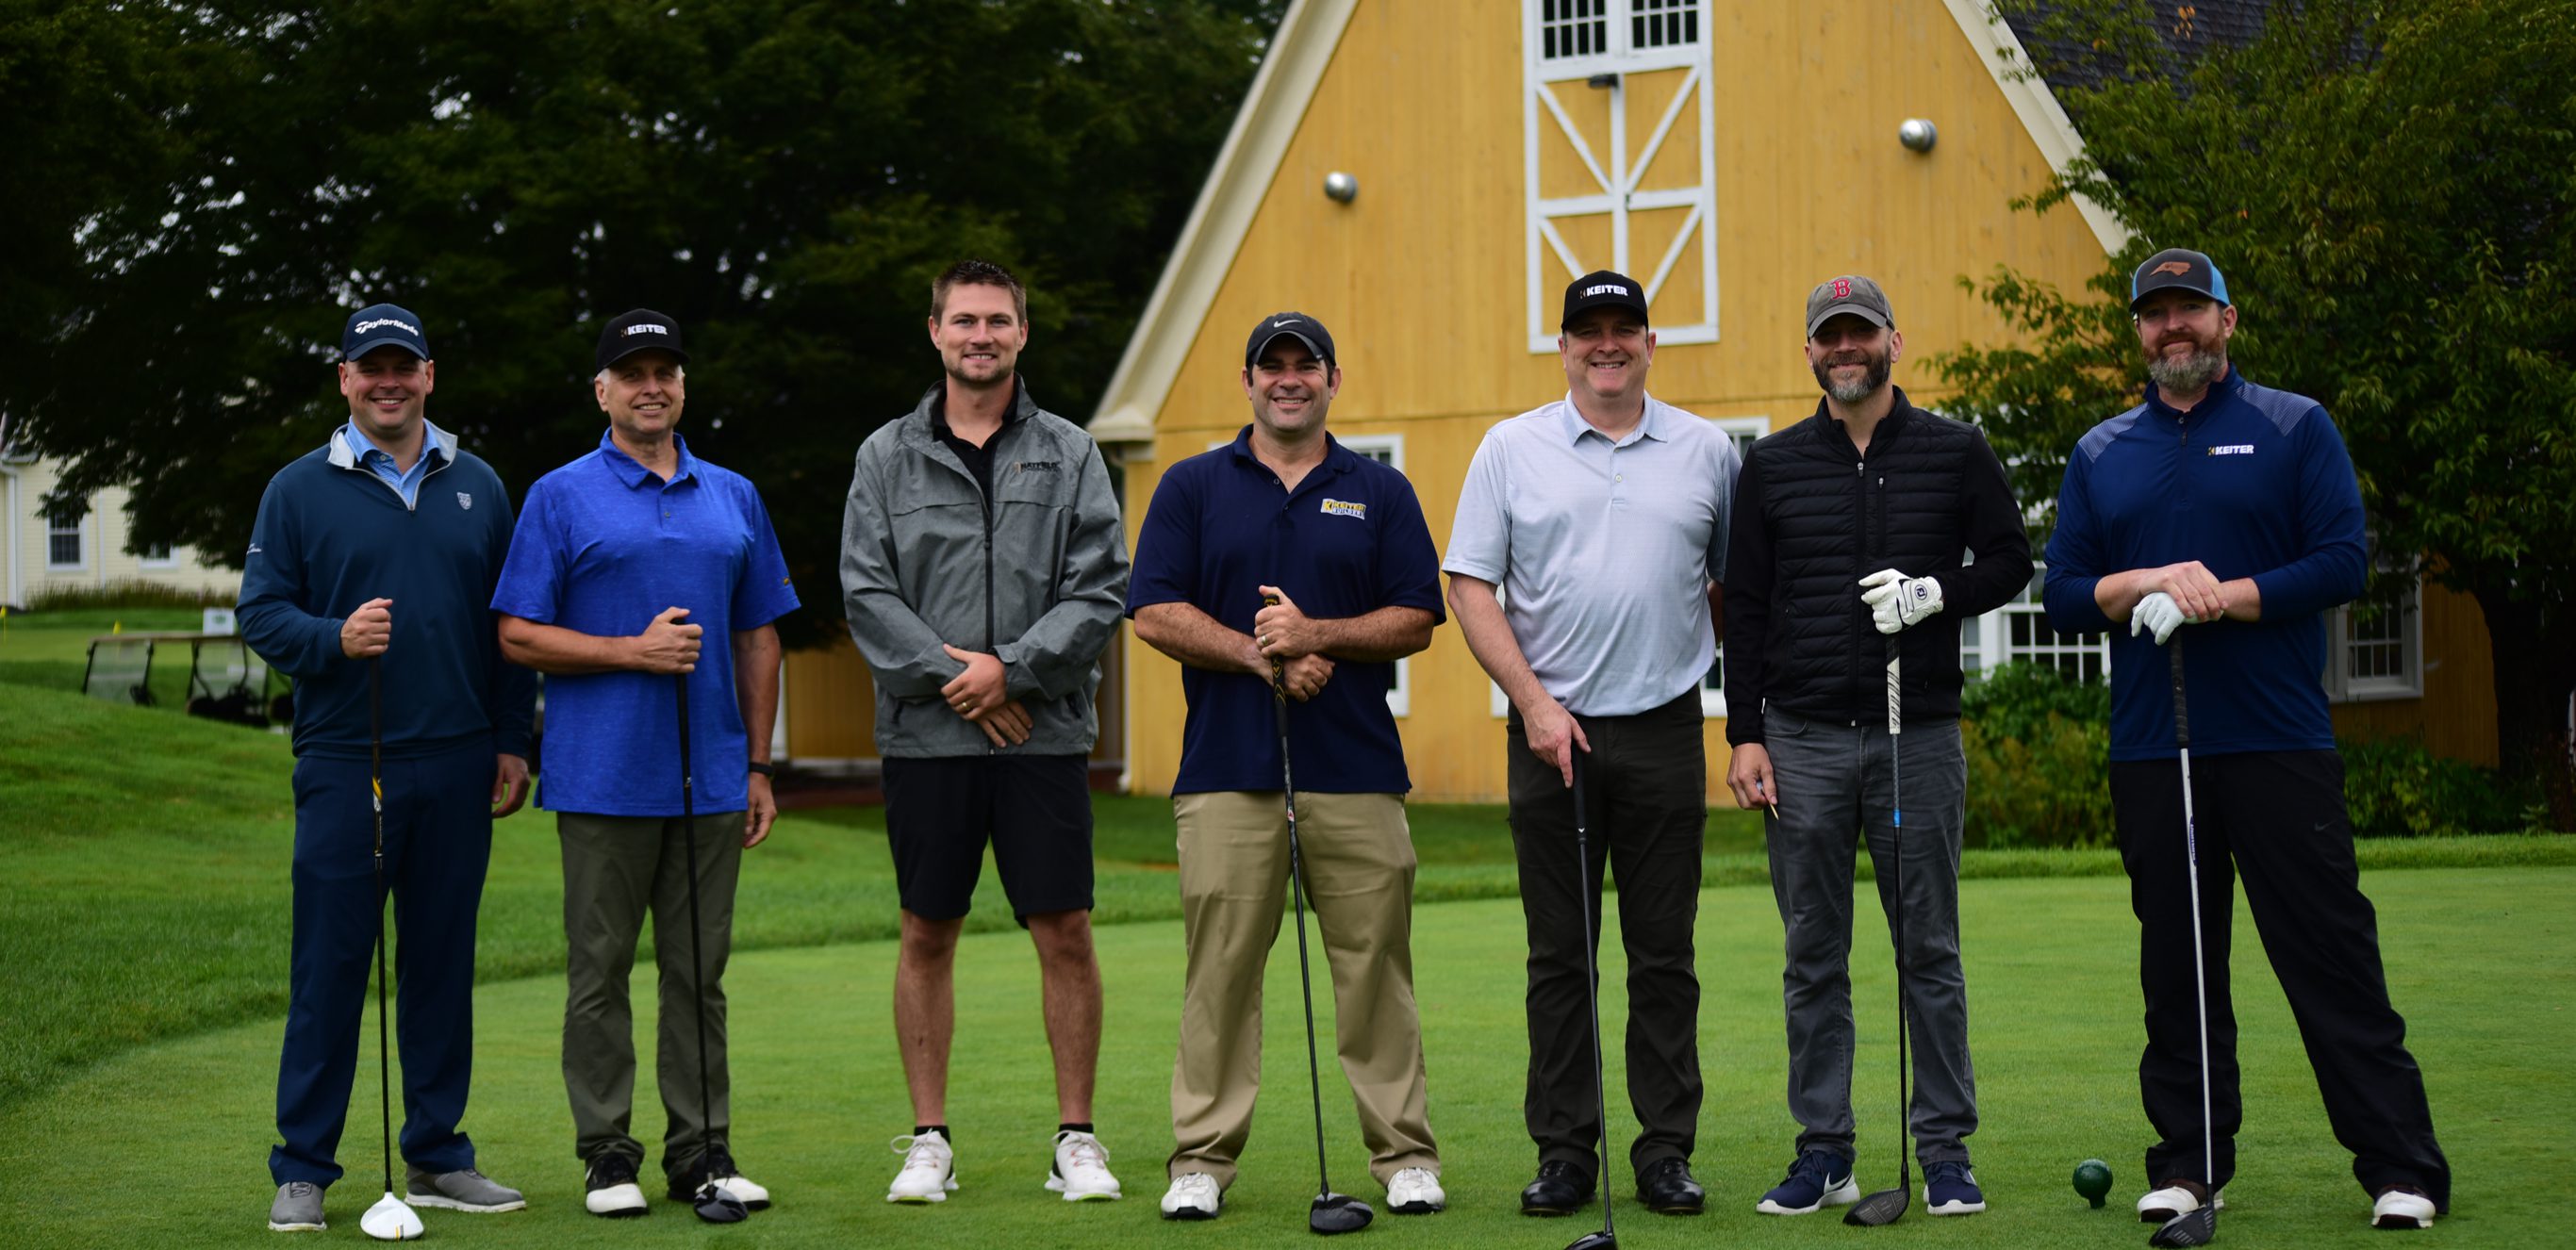 Group of golfers standing on a green.